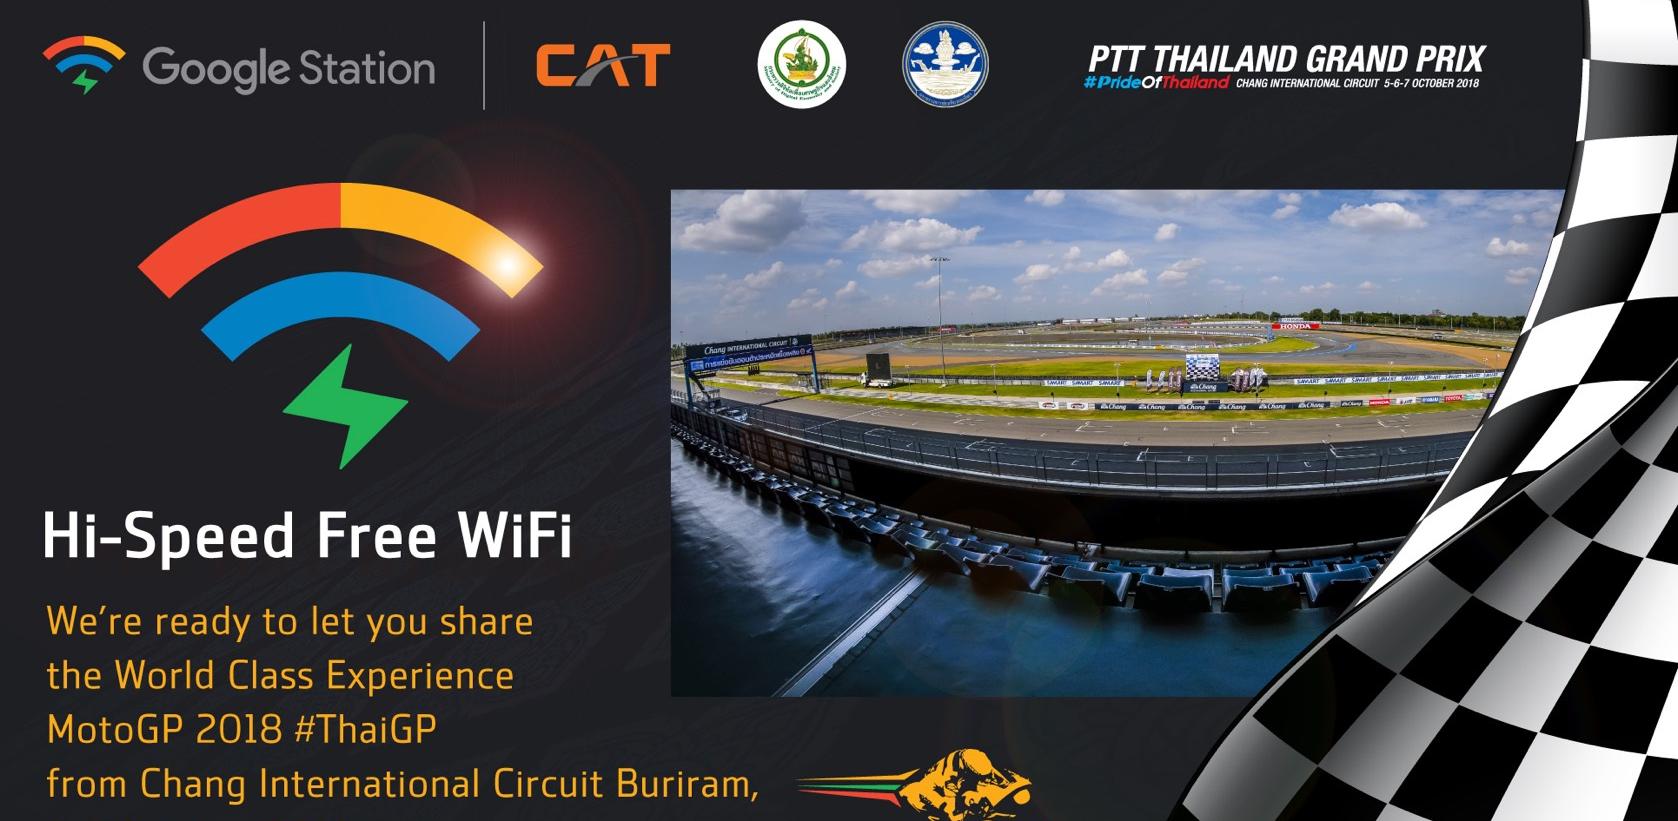 Google Station-CAT WiFi to be featured in MotoGP 2018